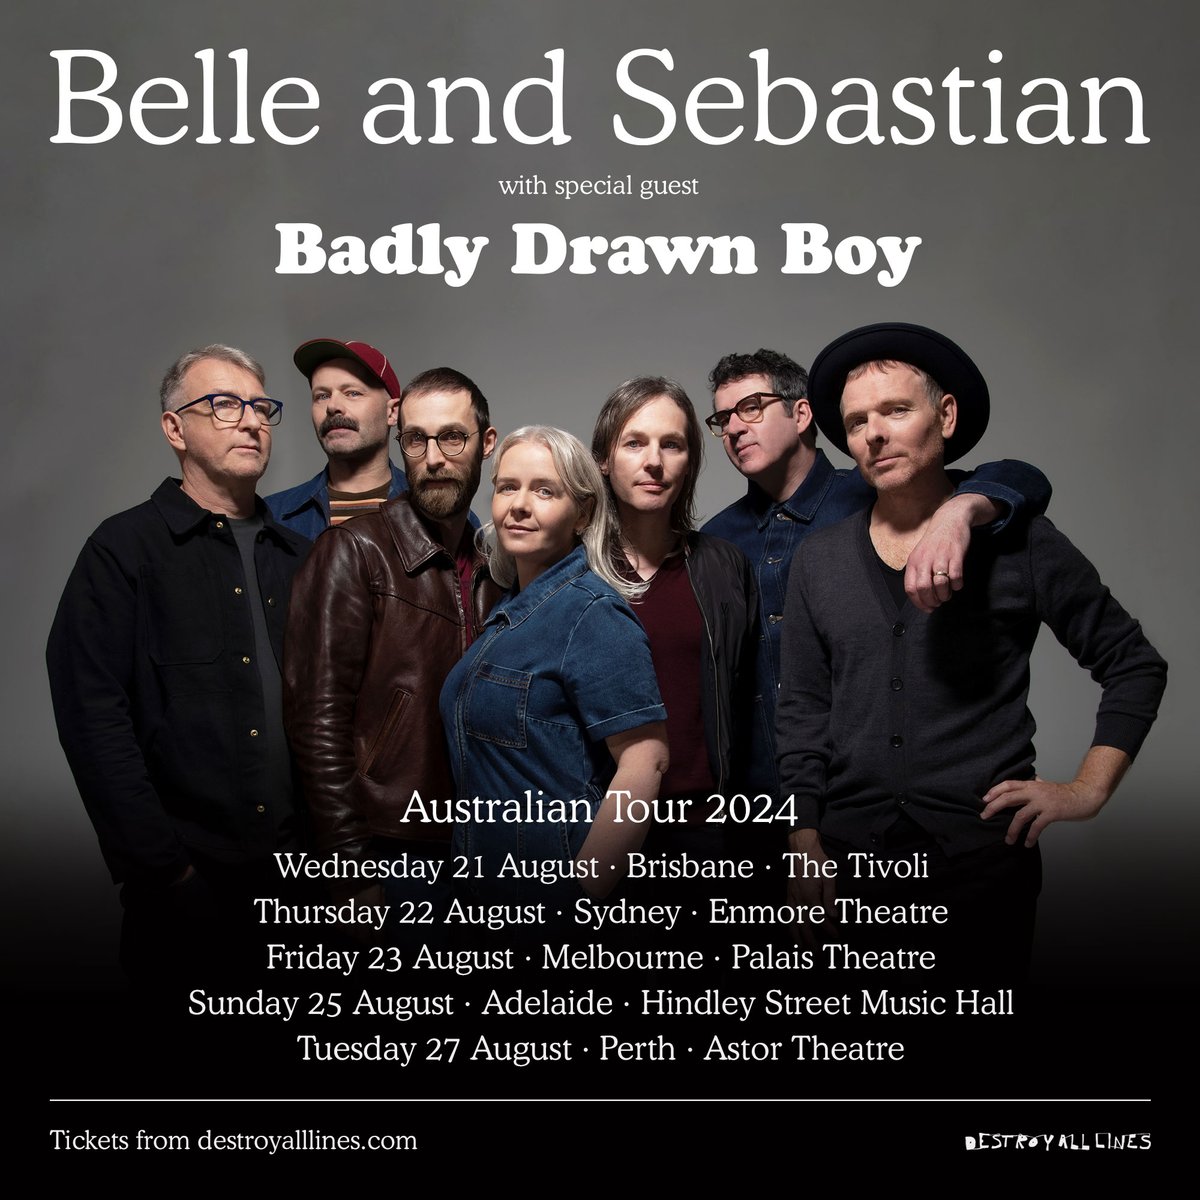 Scottish indie icons Belle and Sebastian will tour Australia this August. They'll be joined on the tour by English singer-songwriter Badly Drawn Boy. Early bird presale: Tue 7 May @ 9 AM local Sign up ➟ daltours.cc/24bas General public on-sale: Thu 9 May @ local